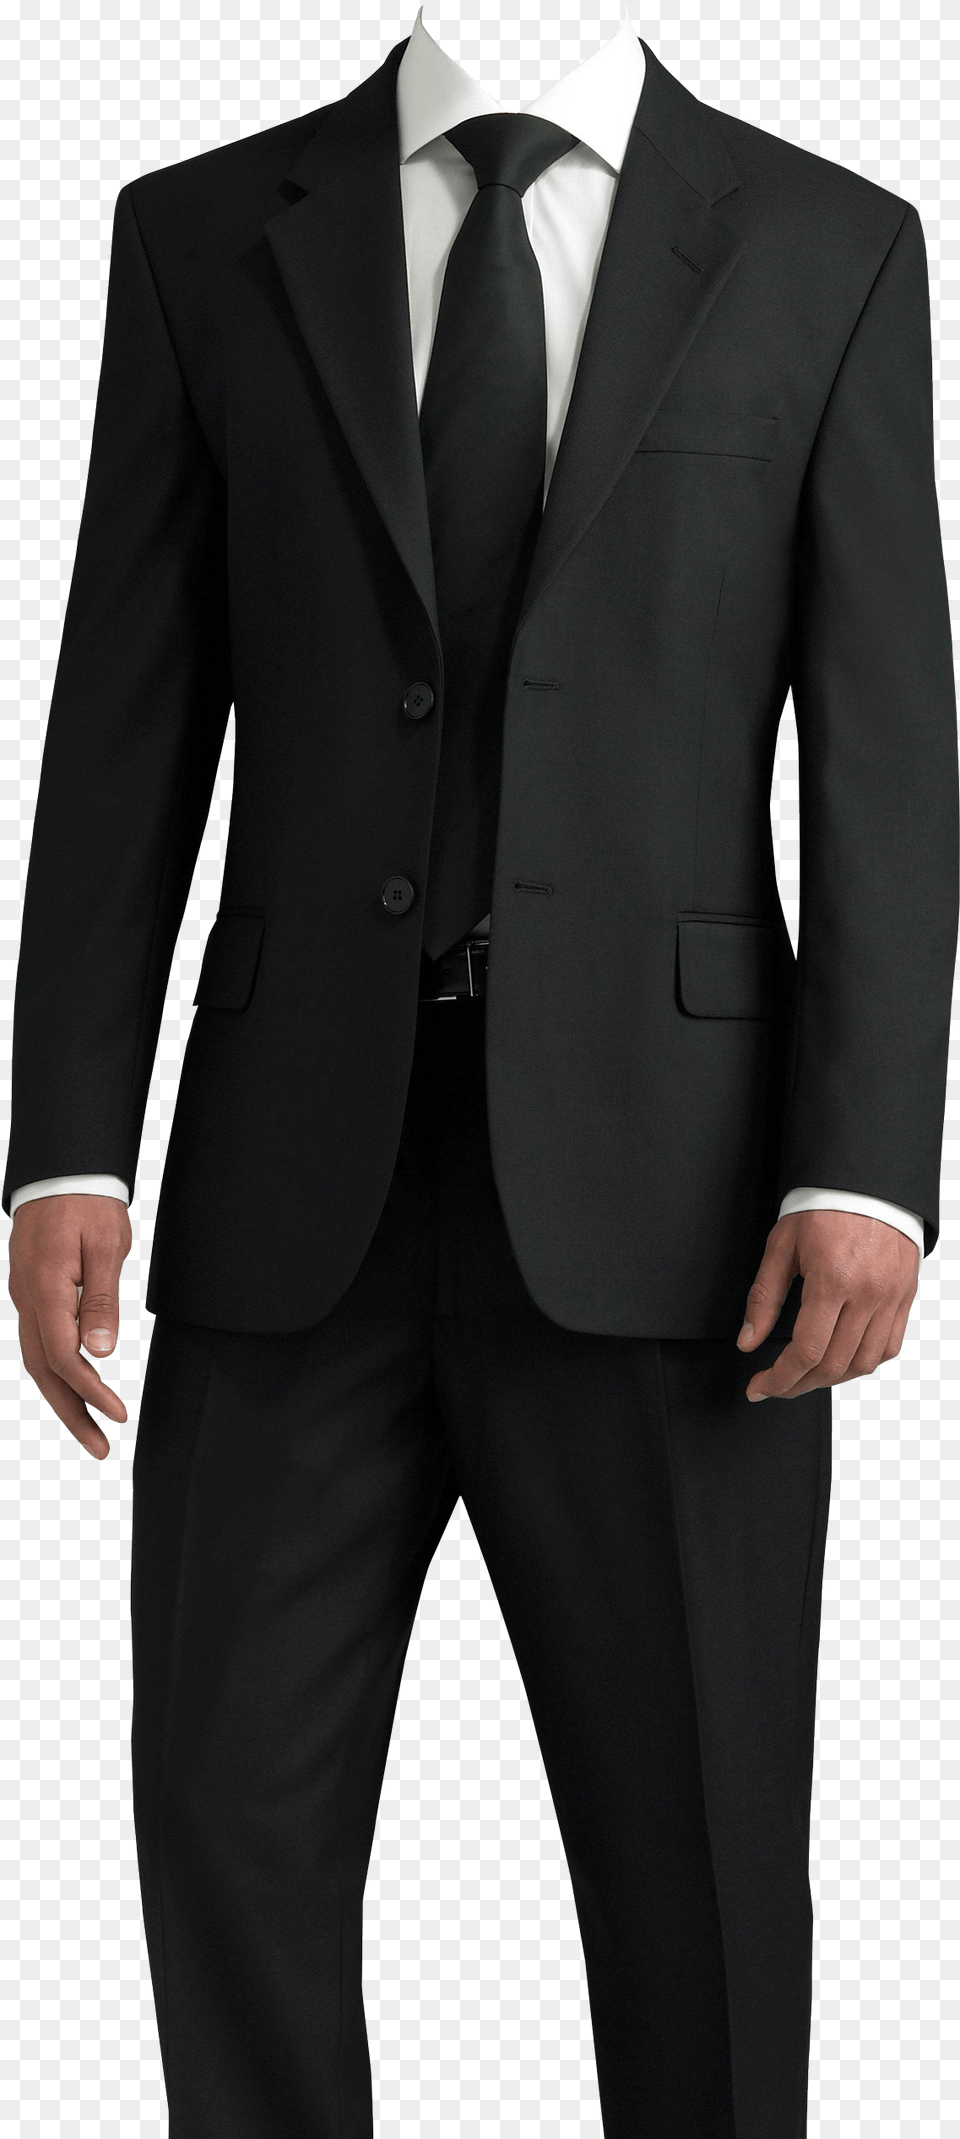 Black Man In Suit Image Suit For Photoshop, Clothing, Formal Wear, Tuxedo, Coat Free Png